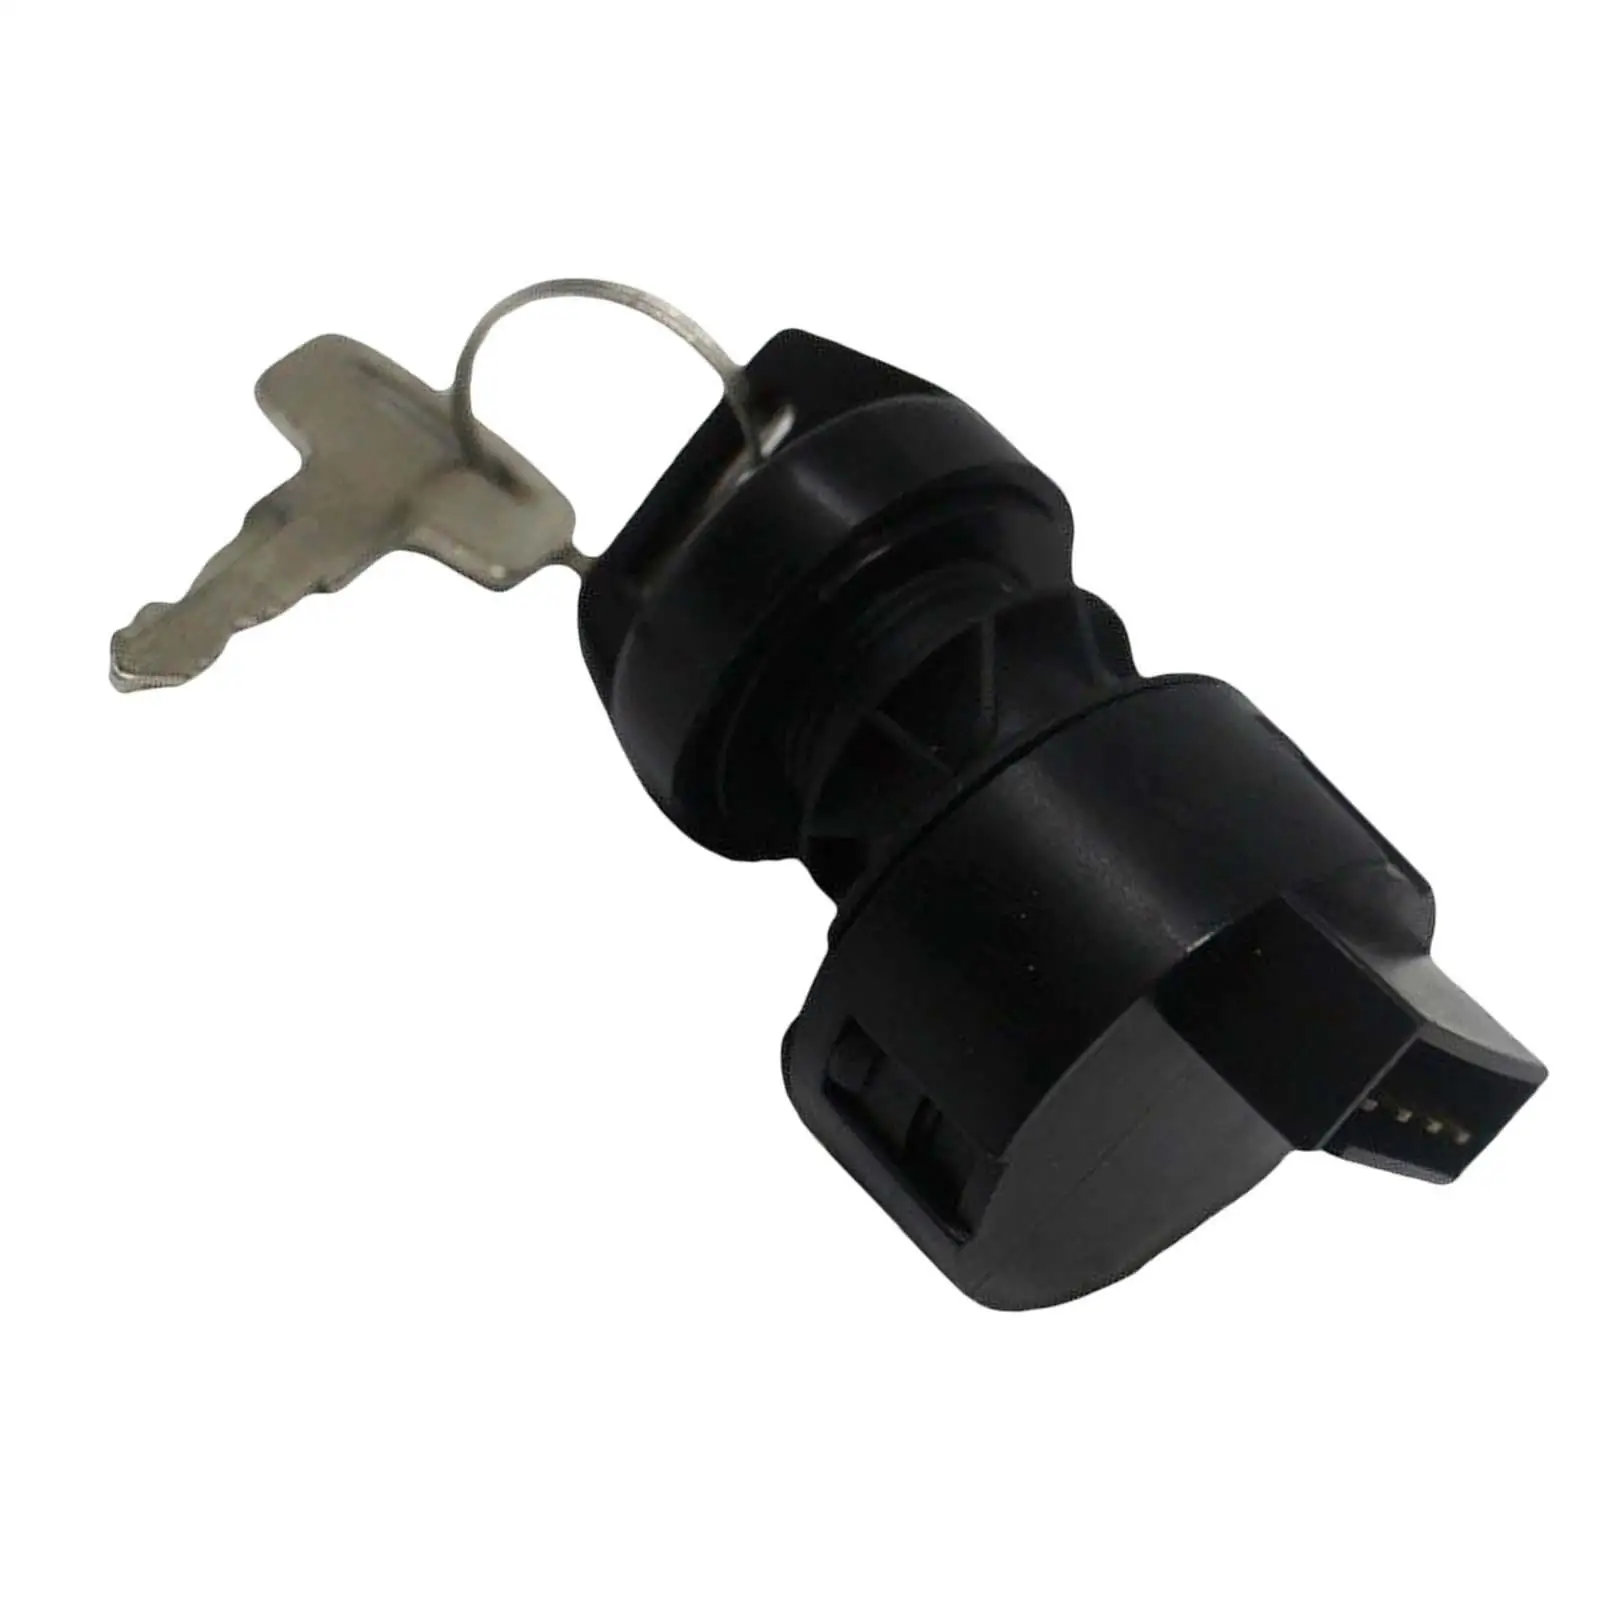 Ignition Switch Lock Replacement Practical Portable Parts Professional Easy to Install Black for 335 400 500 600